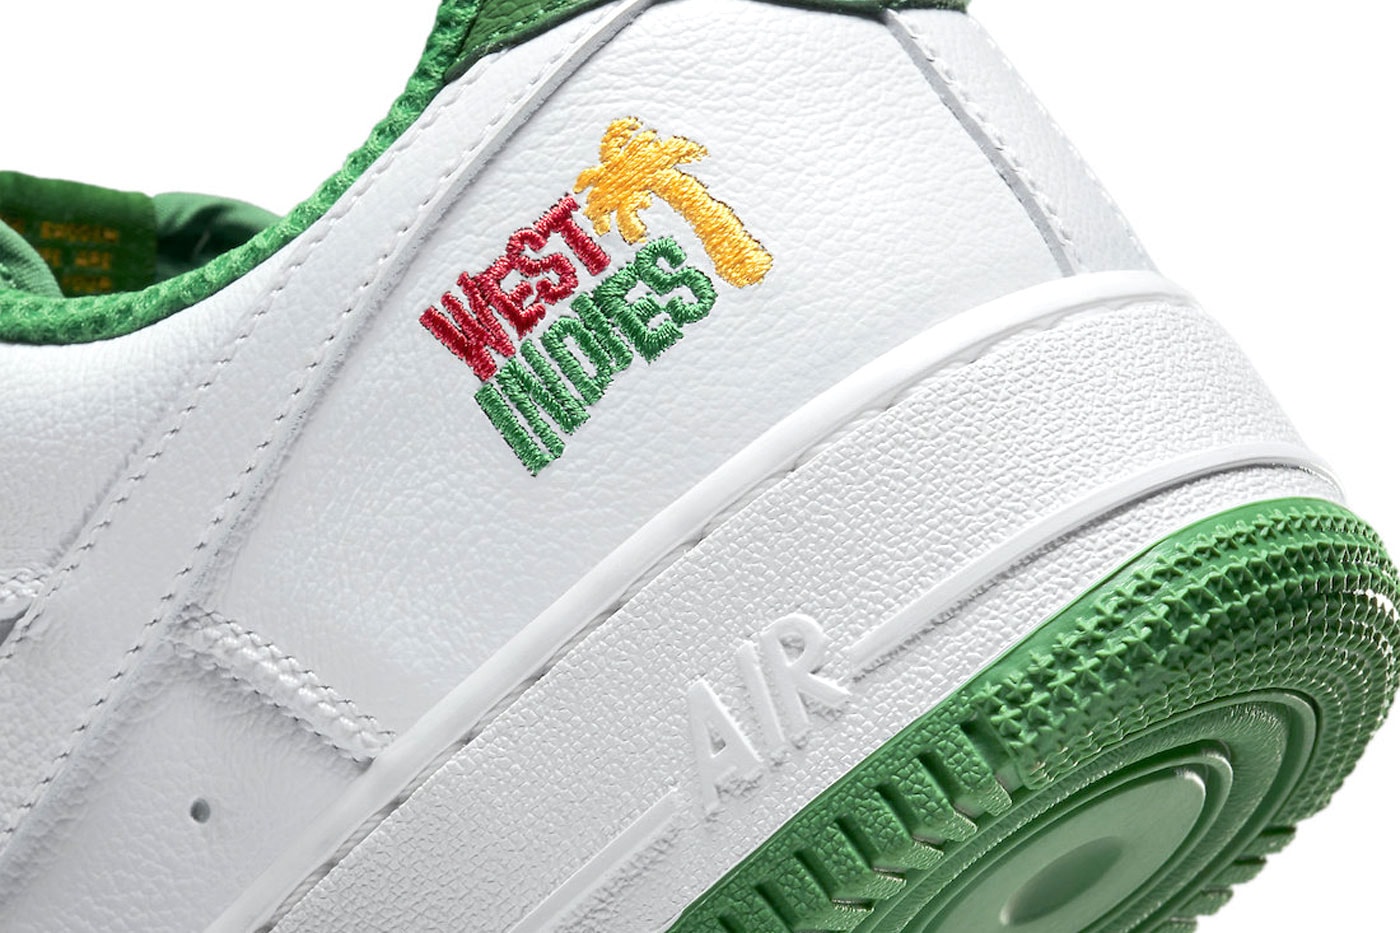 Nike Air Force 1 Low West Indies dx1156 100 classic green white september 2022 140 usd release info date price